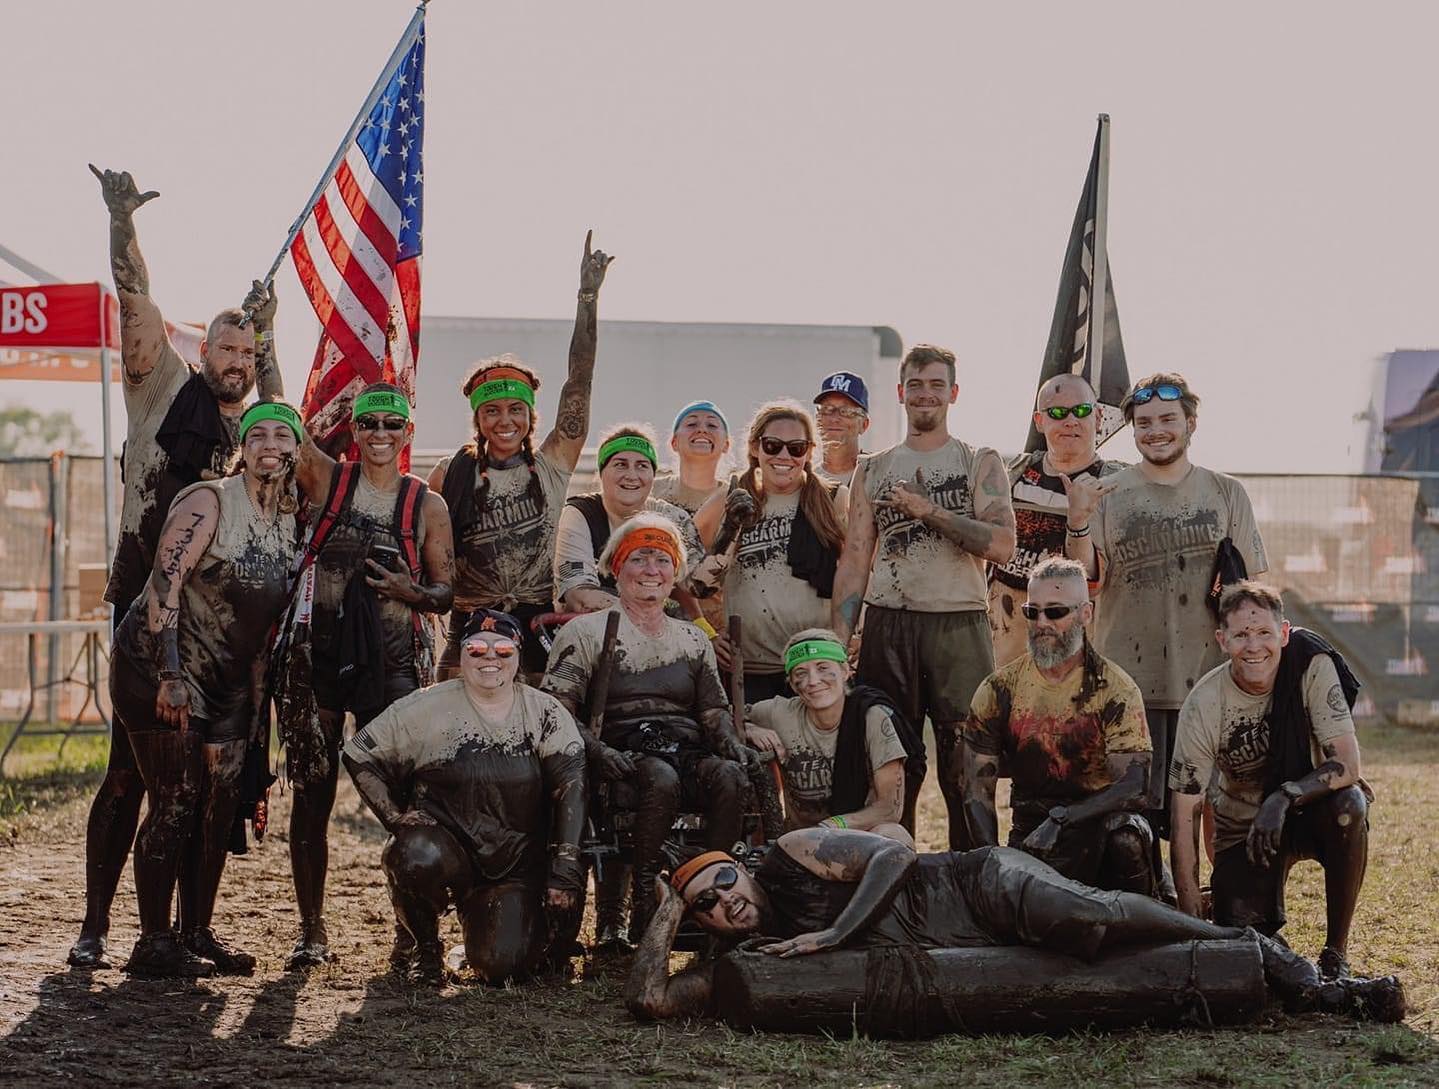 Team Oscar Mike participated in the August 2021 Tough Mudder event in Chicago